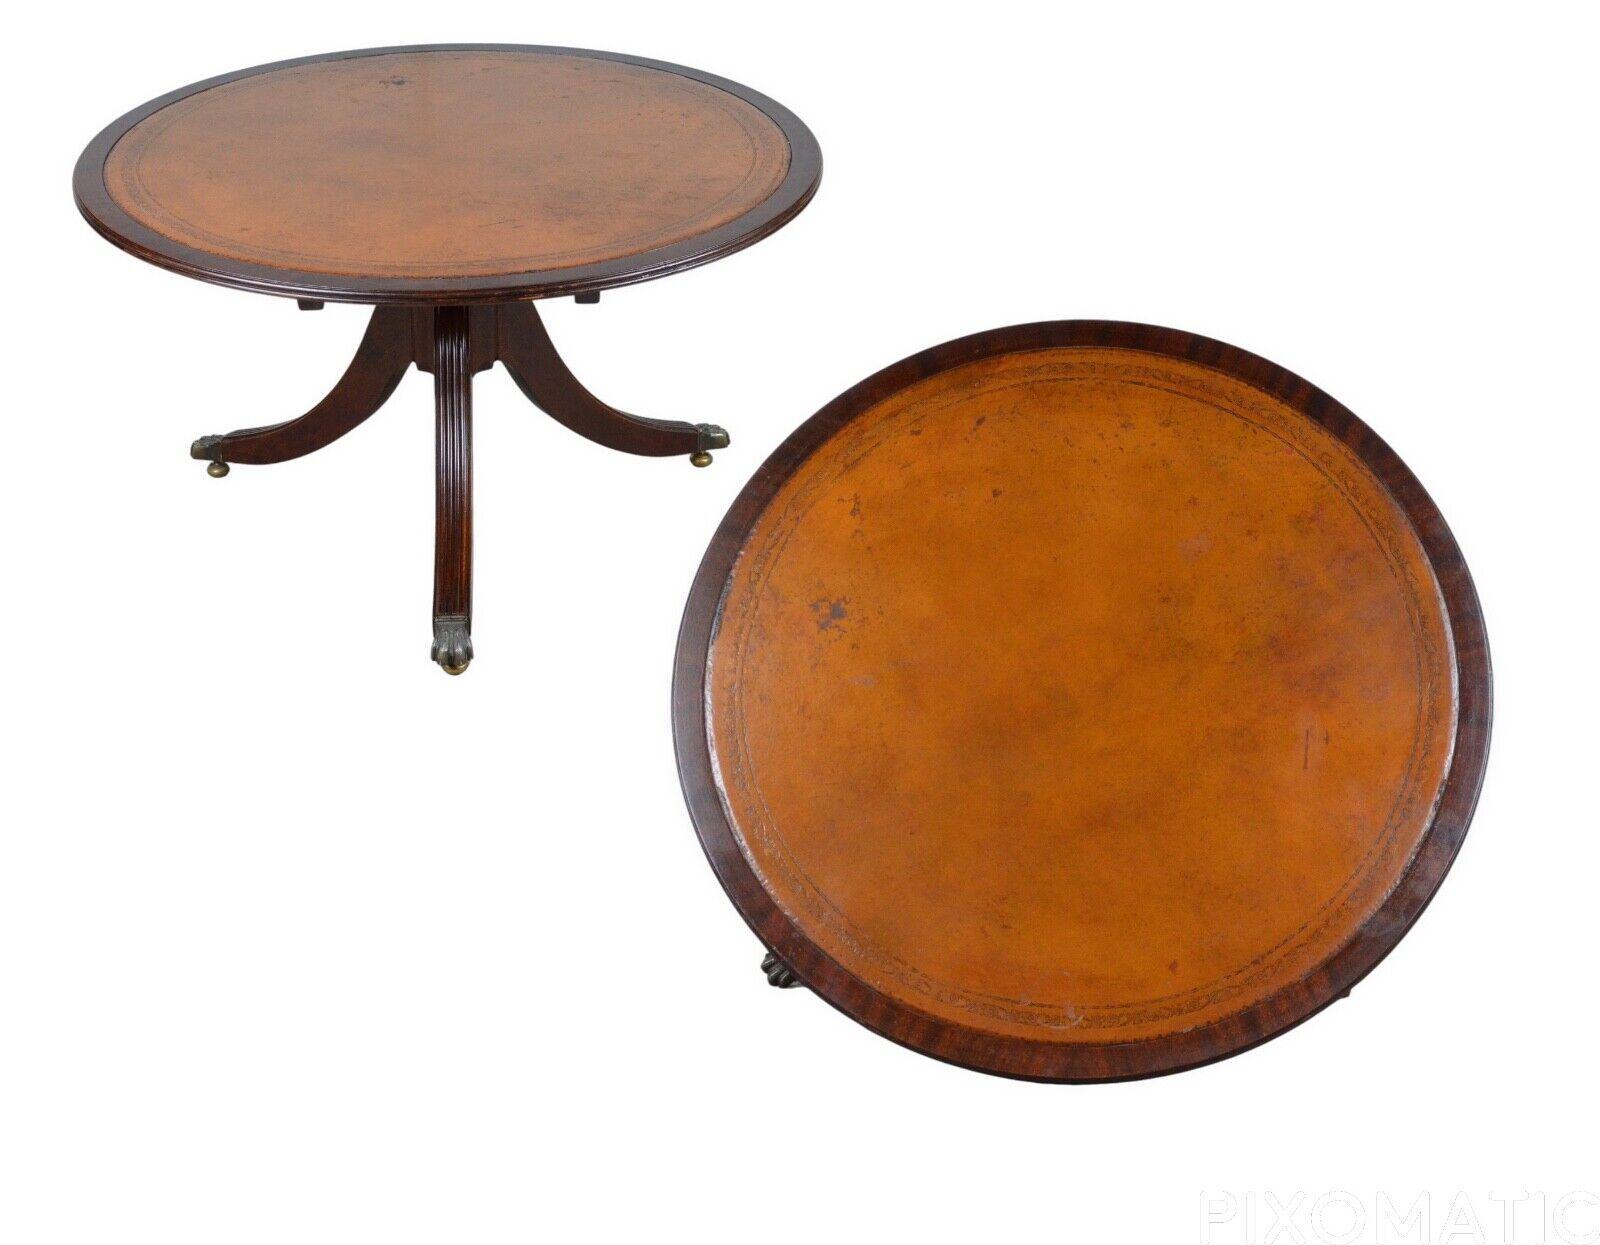 We are delighted to offer for sale this lovely mahogany occasional table, with round table top and faded tan leather, inset with a gold-tooled edge, on a turned column with reeded legs and lion brass cup casters.

Overall the table is in good